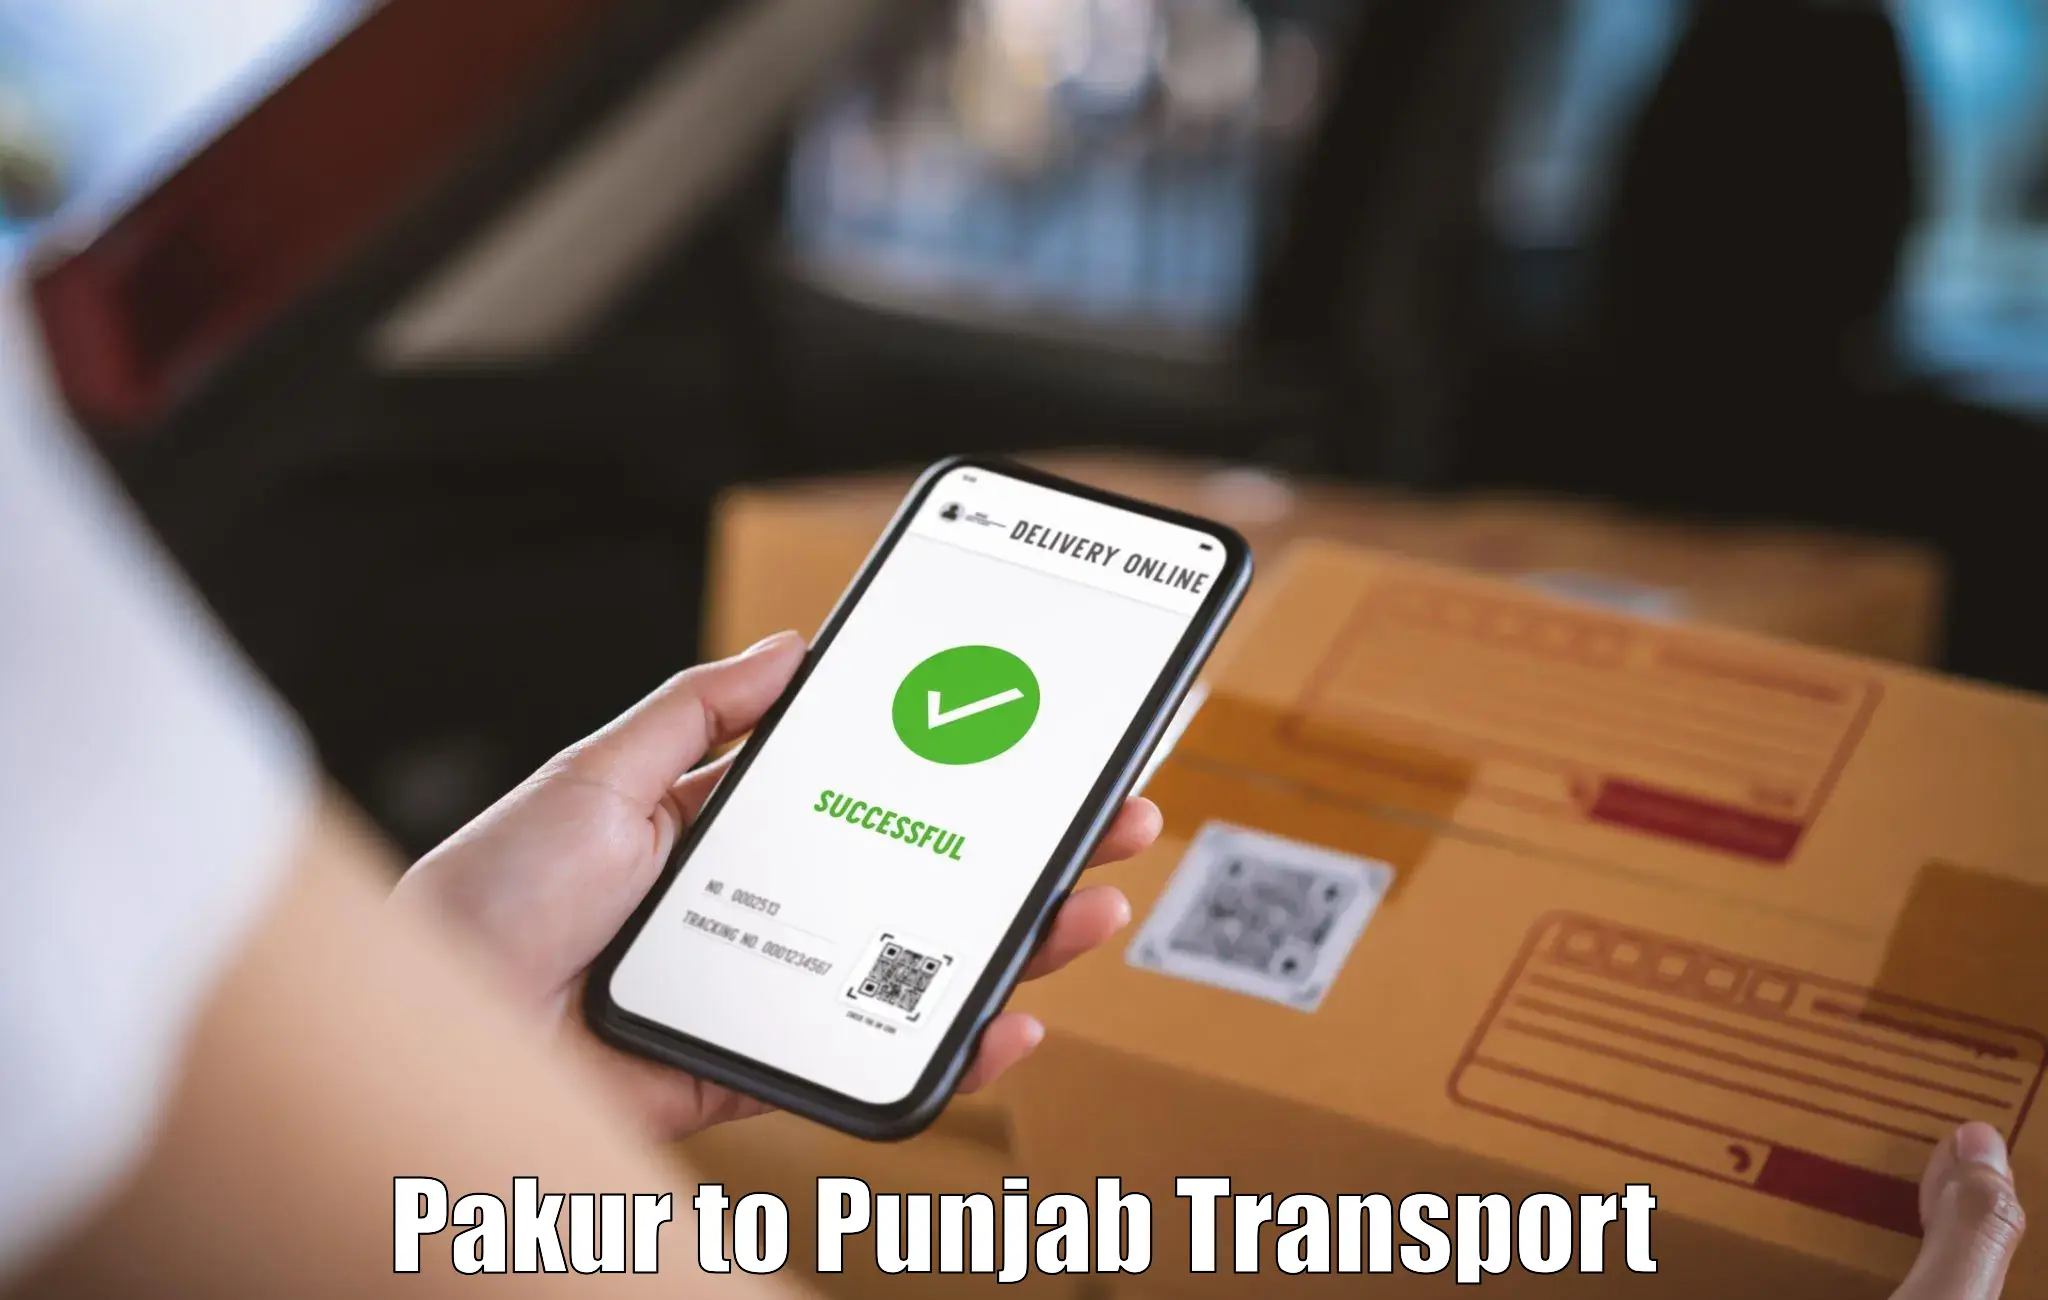 Transport shared services in Pakur to Dera Bassi